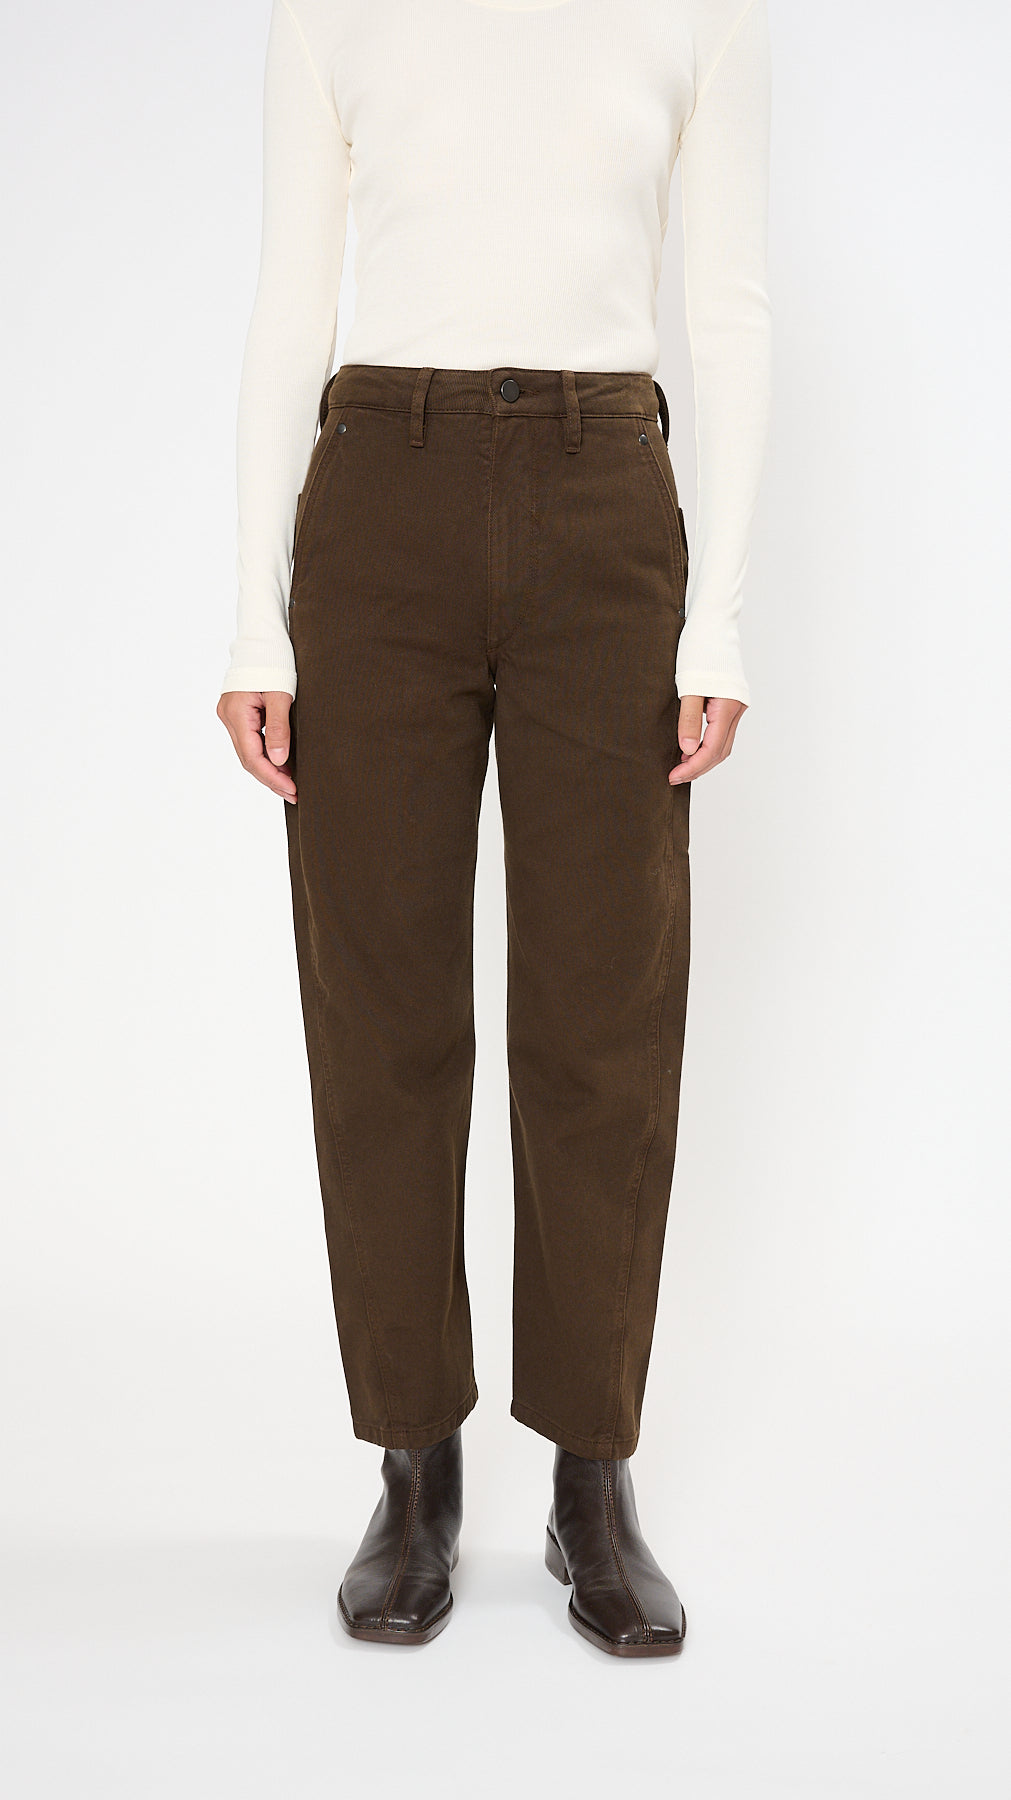 Lemaire Twisted Belted Pants in Espresso, Voo Store Berlin